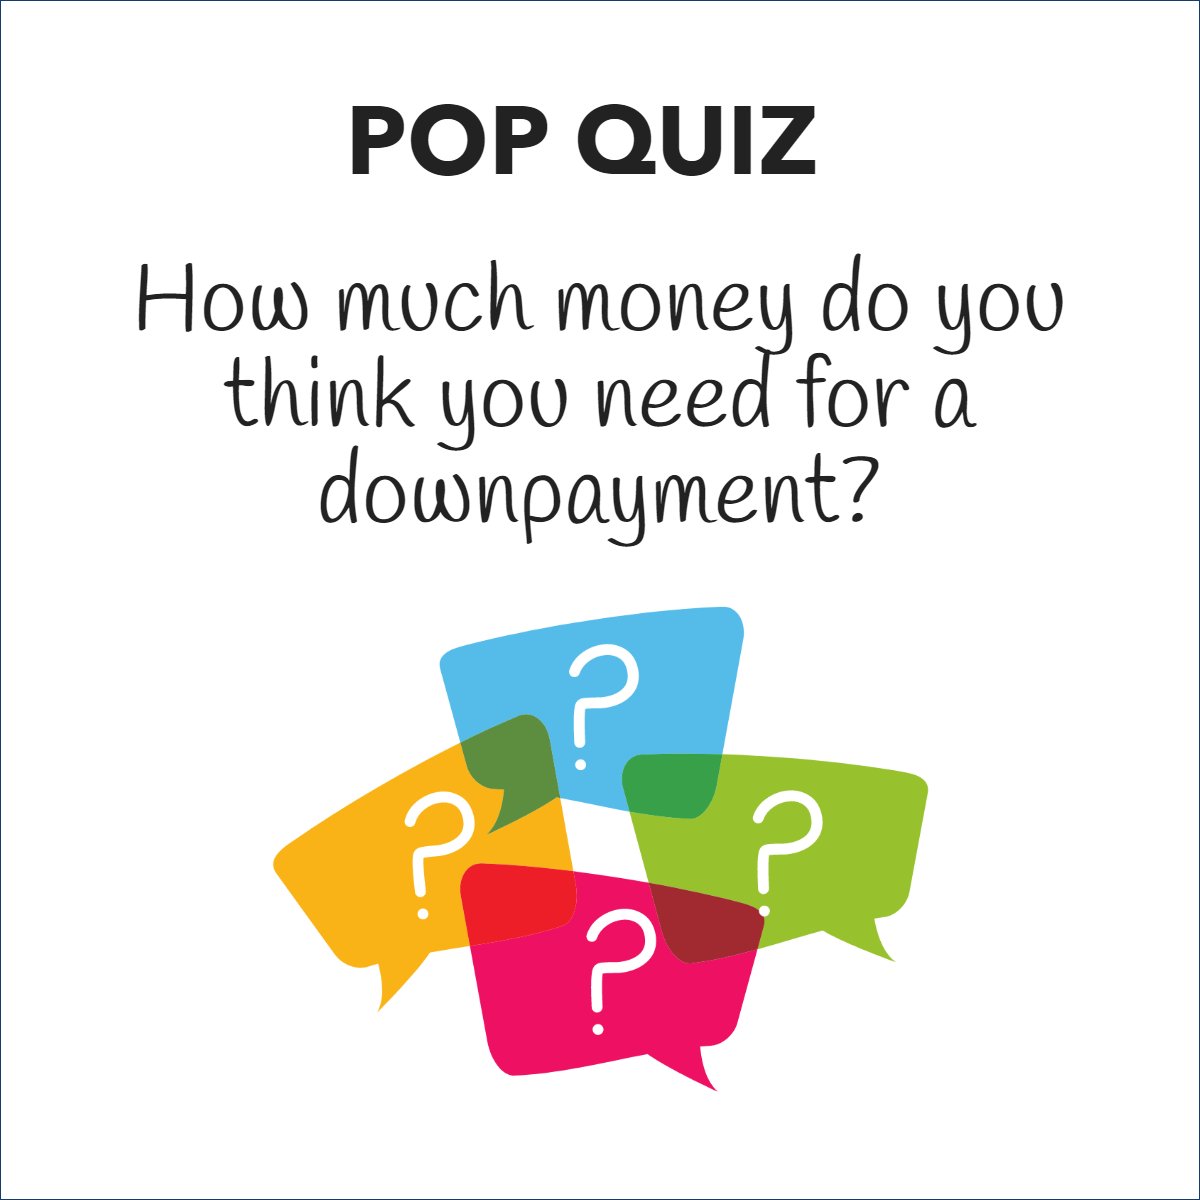 Fast Fact:

While a 20% down payment was once the standard, many homebuyers now pay 5% or less. 💰

#realestate #realestatetips #downpayment #downpaymentassistance #popquiz #realestate101
 #cincyrealtors #scavonerealtor #cincinnatirealestate #togetherwemakedealshappen